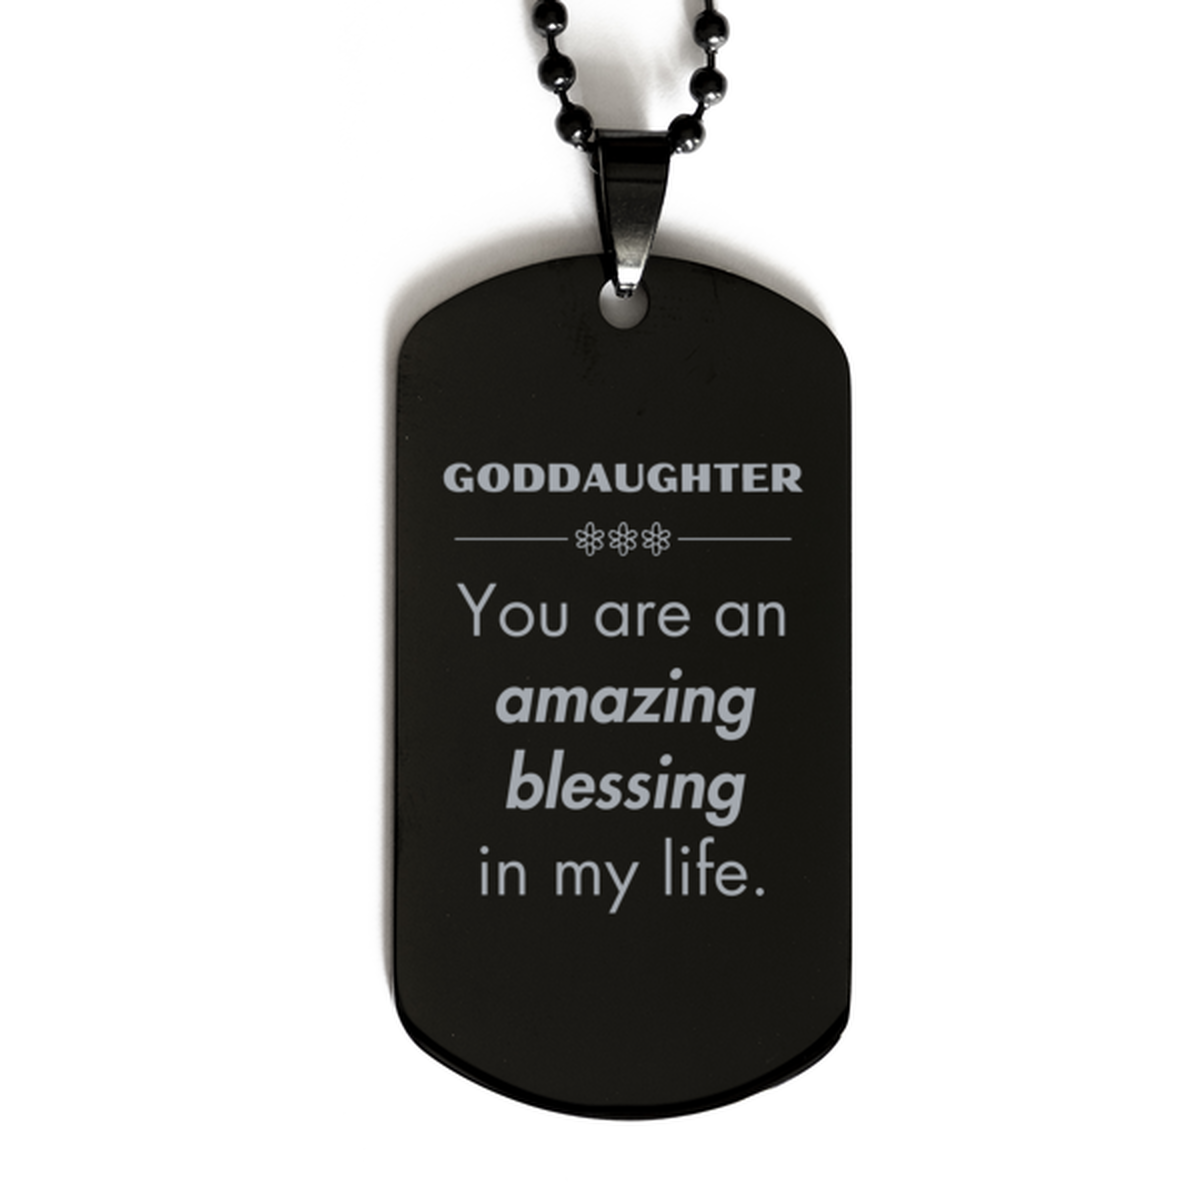 Goddaughter Black Dog Tag, You are an amazing blessing in my life, Thank You Gifts For Goddaughter, Inspirational Birthday Christmas Unique Gifts For Goddaughter